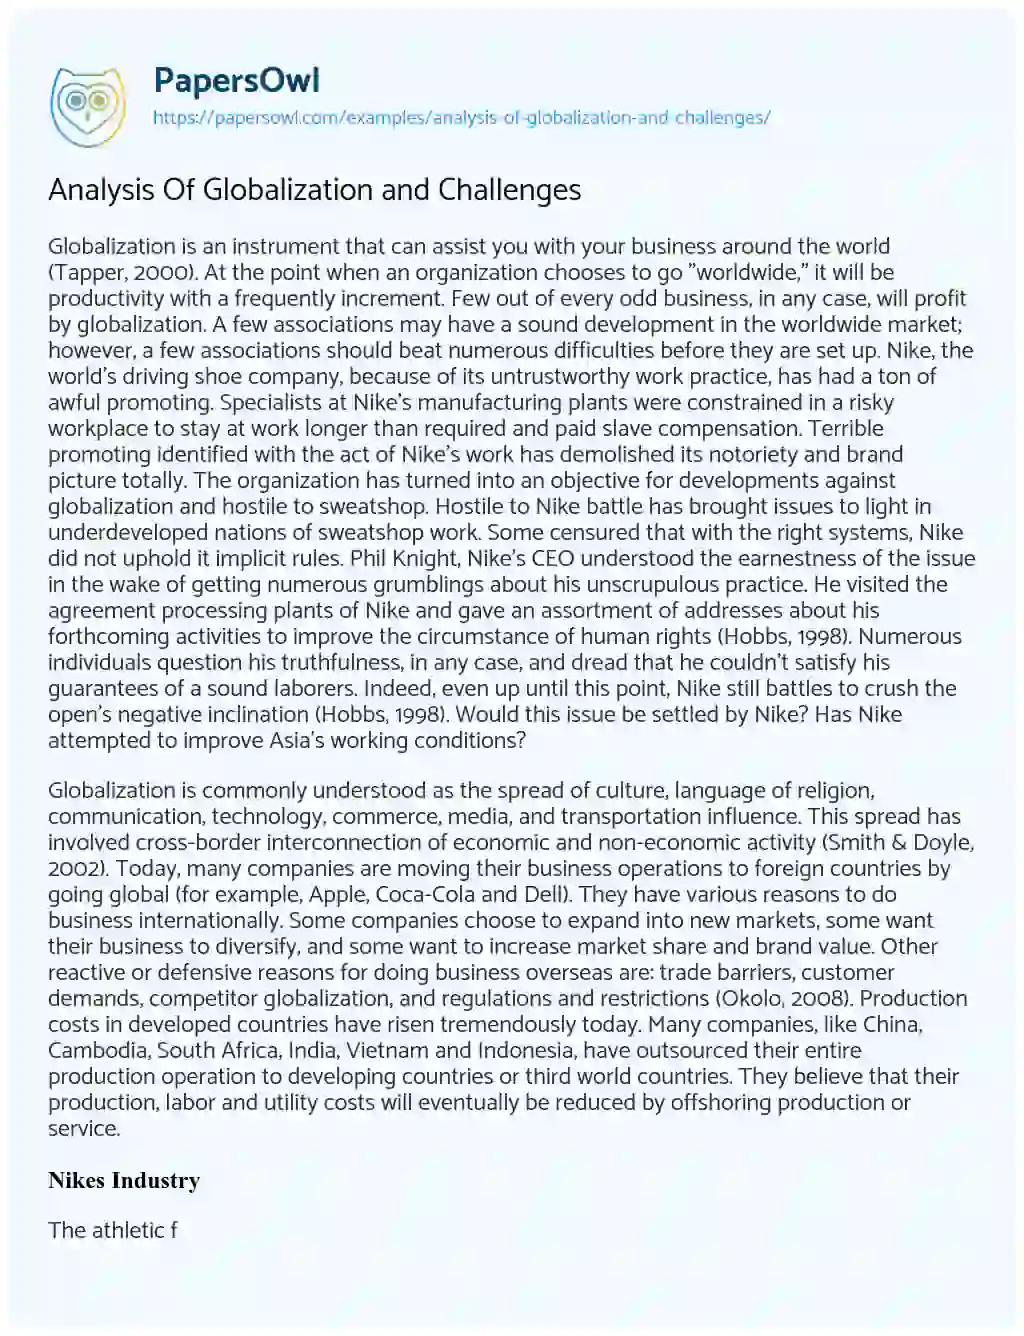 Essay on Analysis of Globalization and Challenges